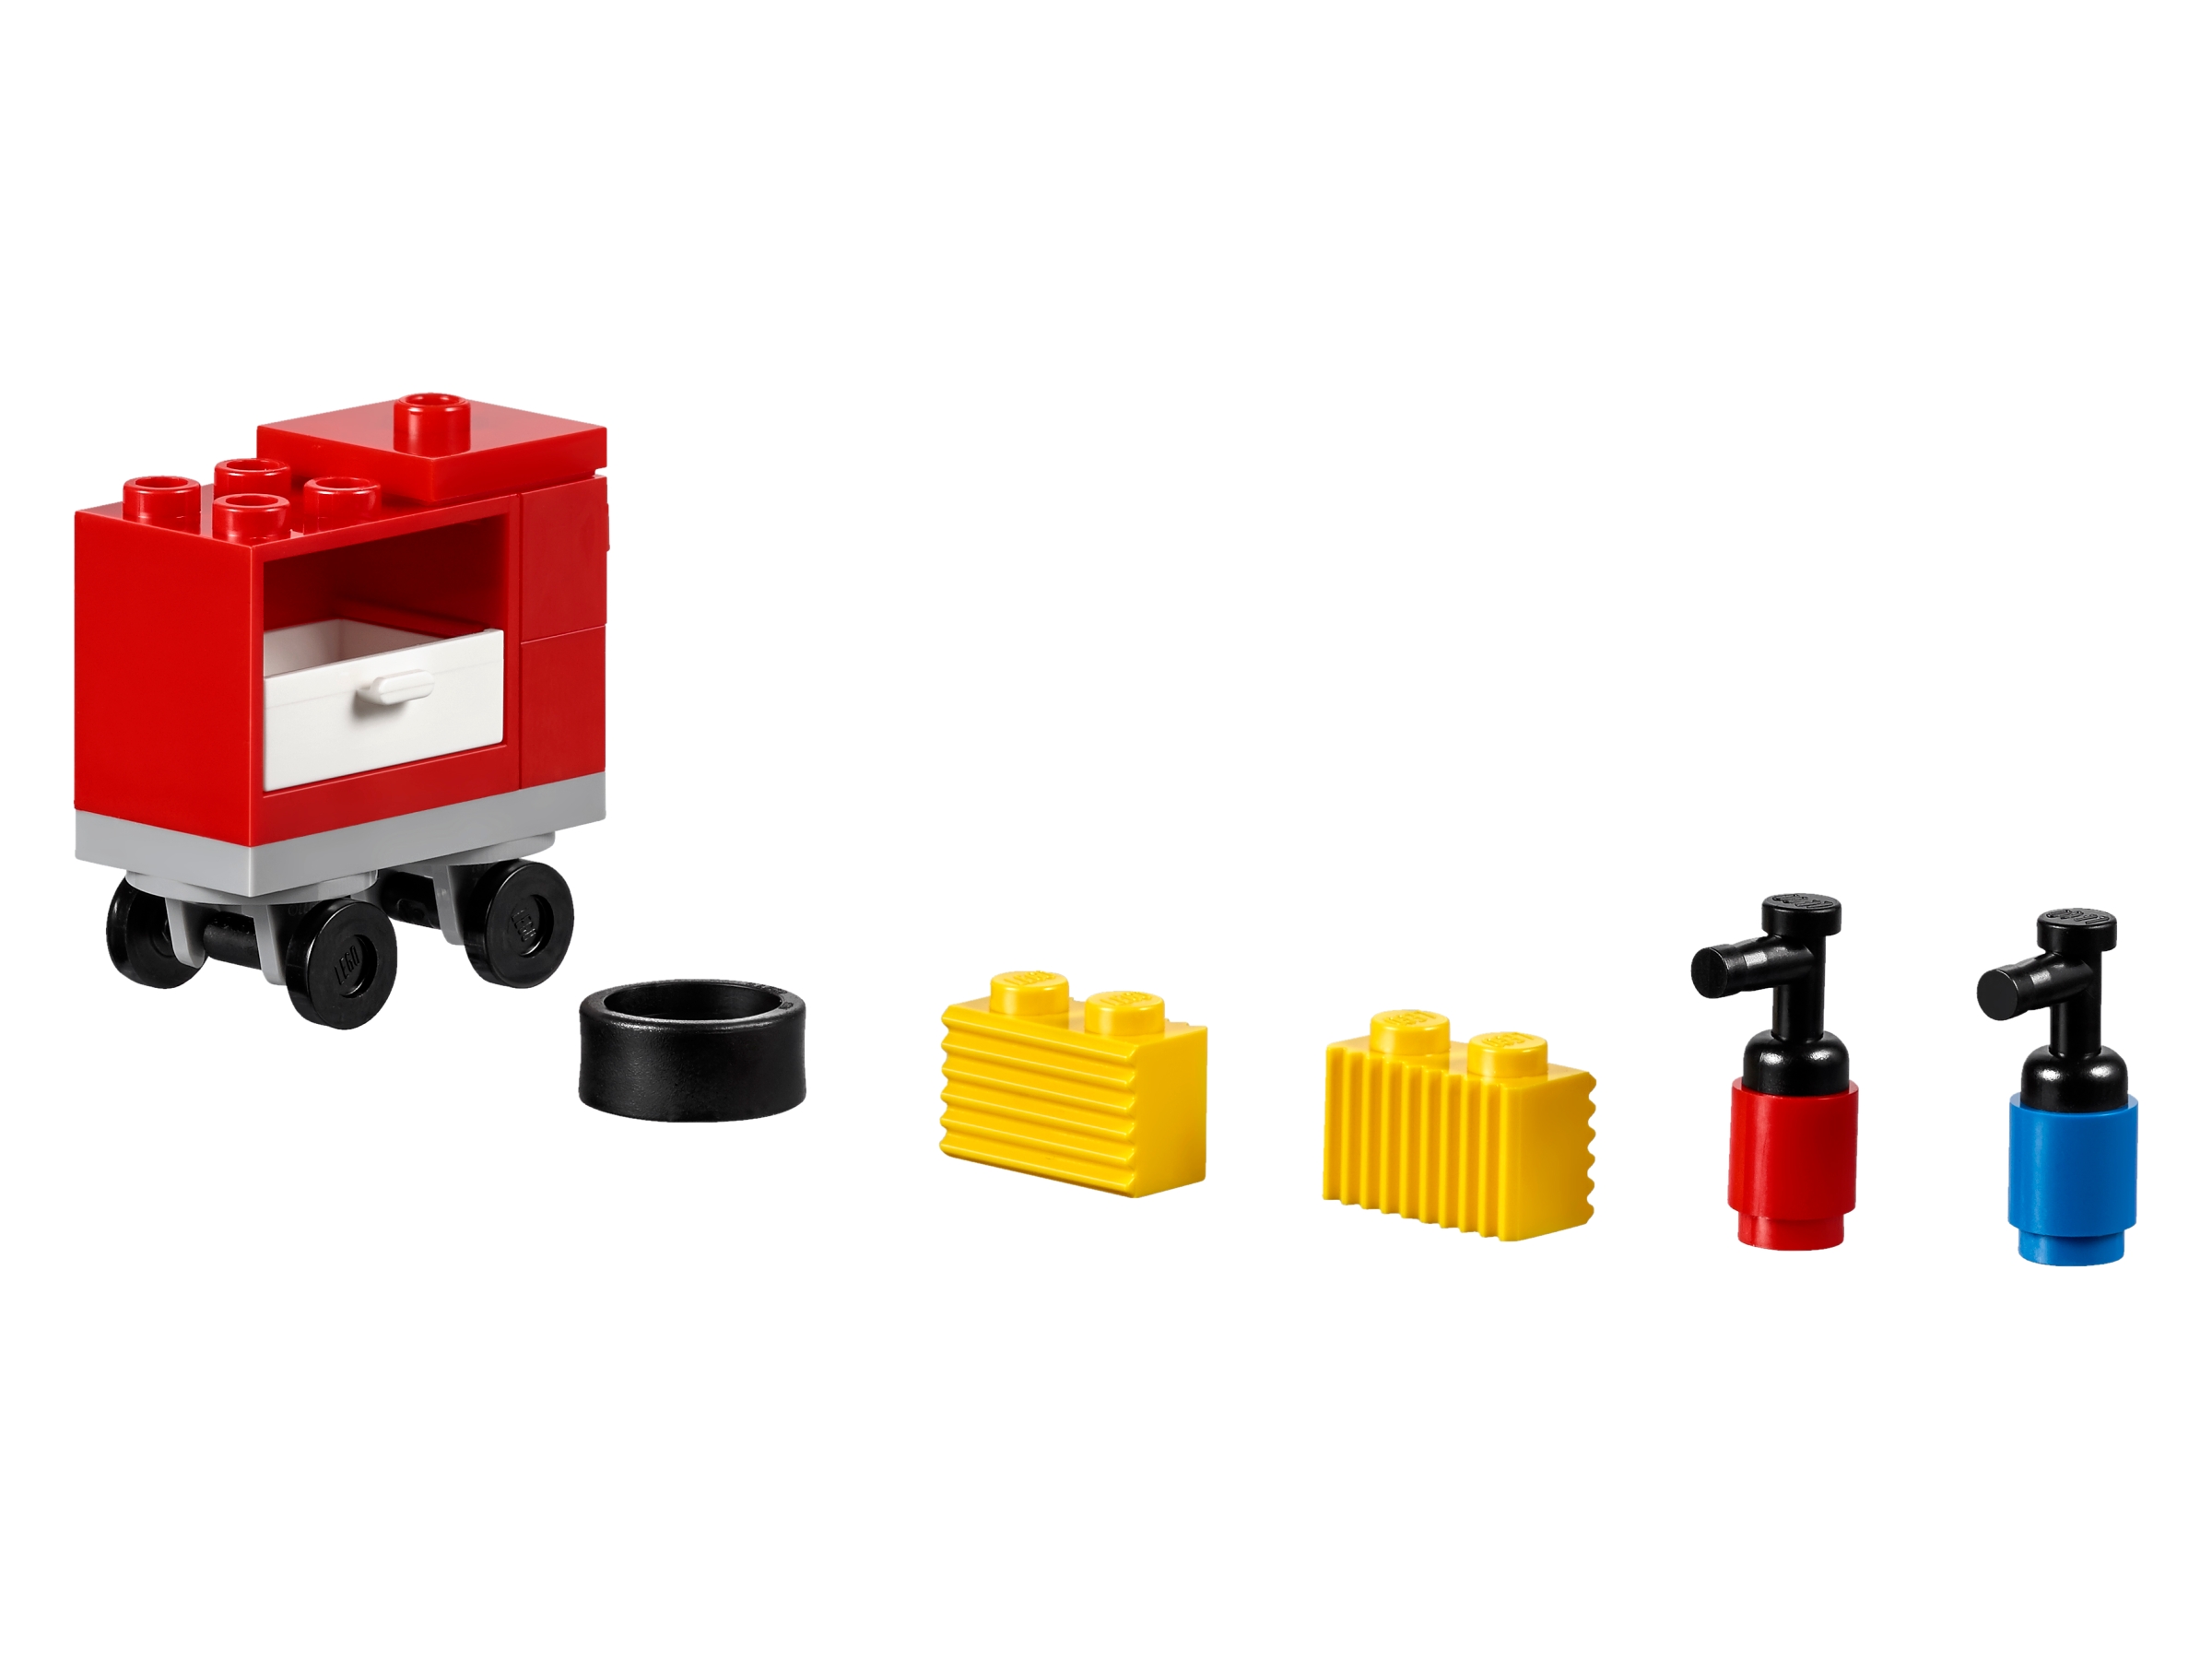 Smokey's 10743 | Juniors | Buy online Official LEGO® Shop US